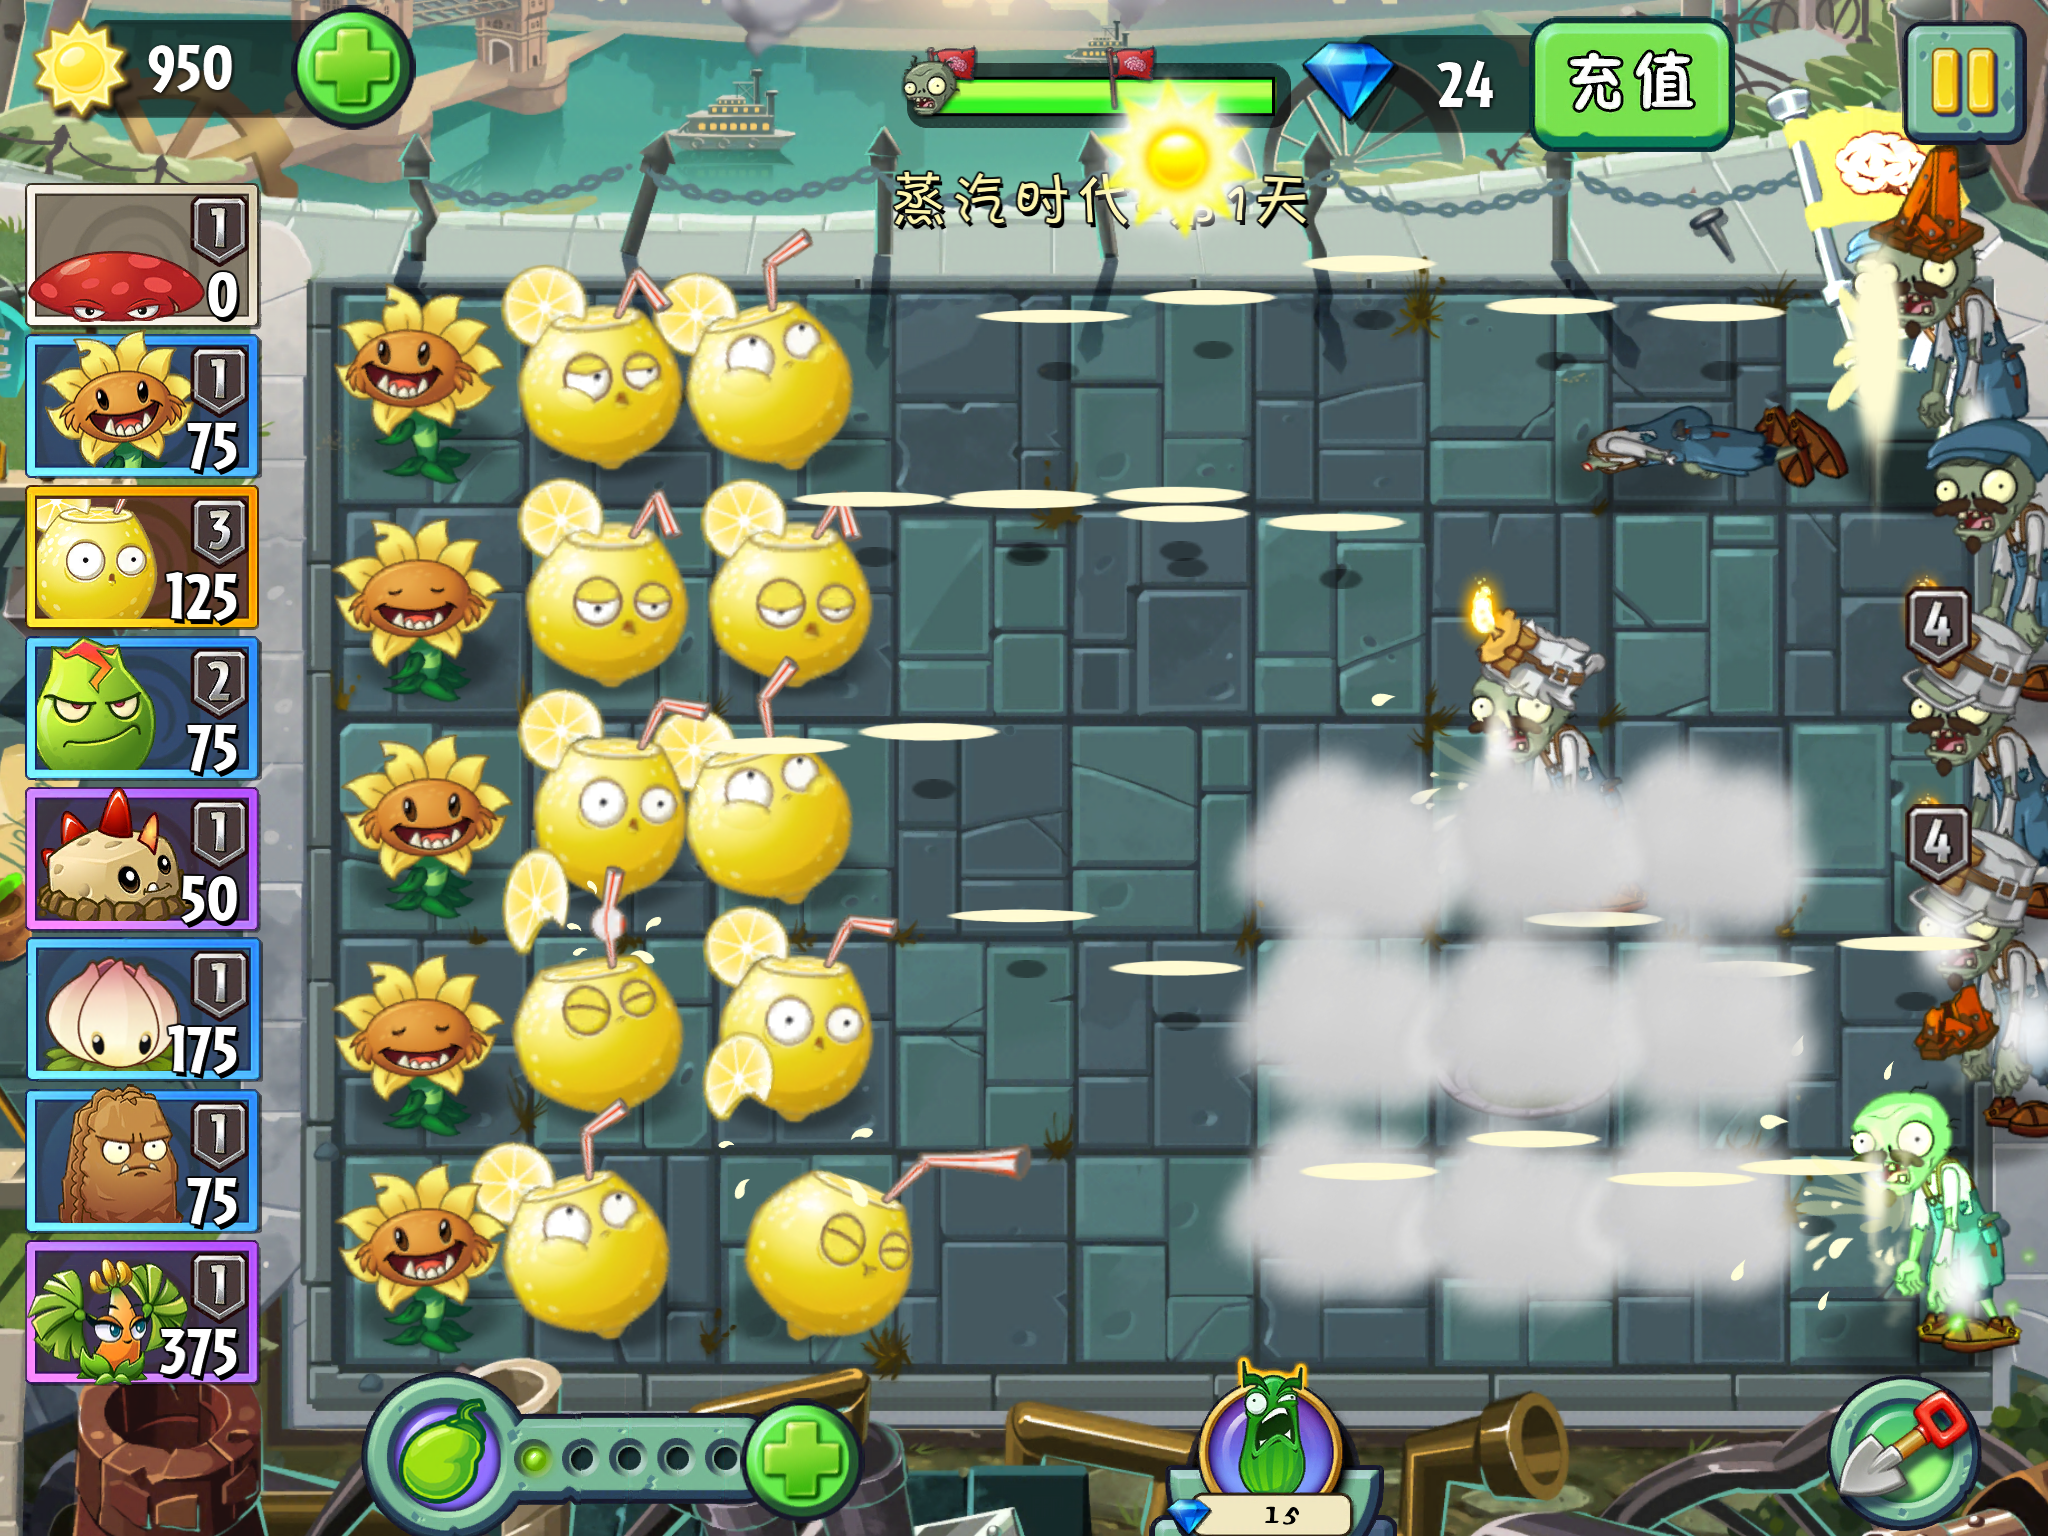 Steam Age - Day 21, Plants vs. Zombies Wiki